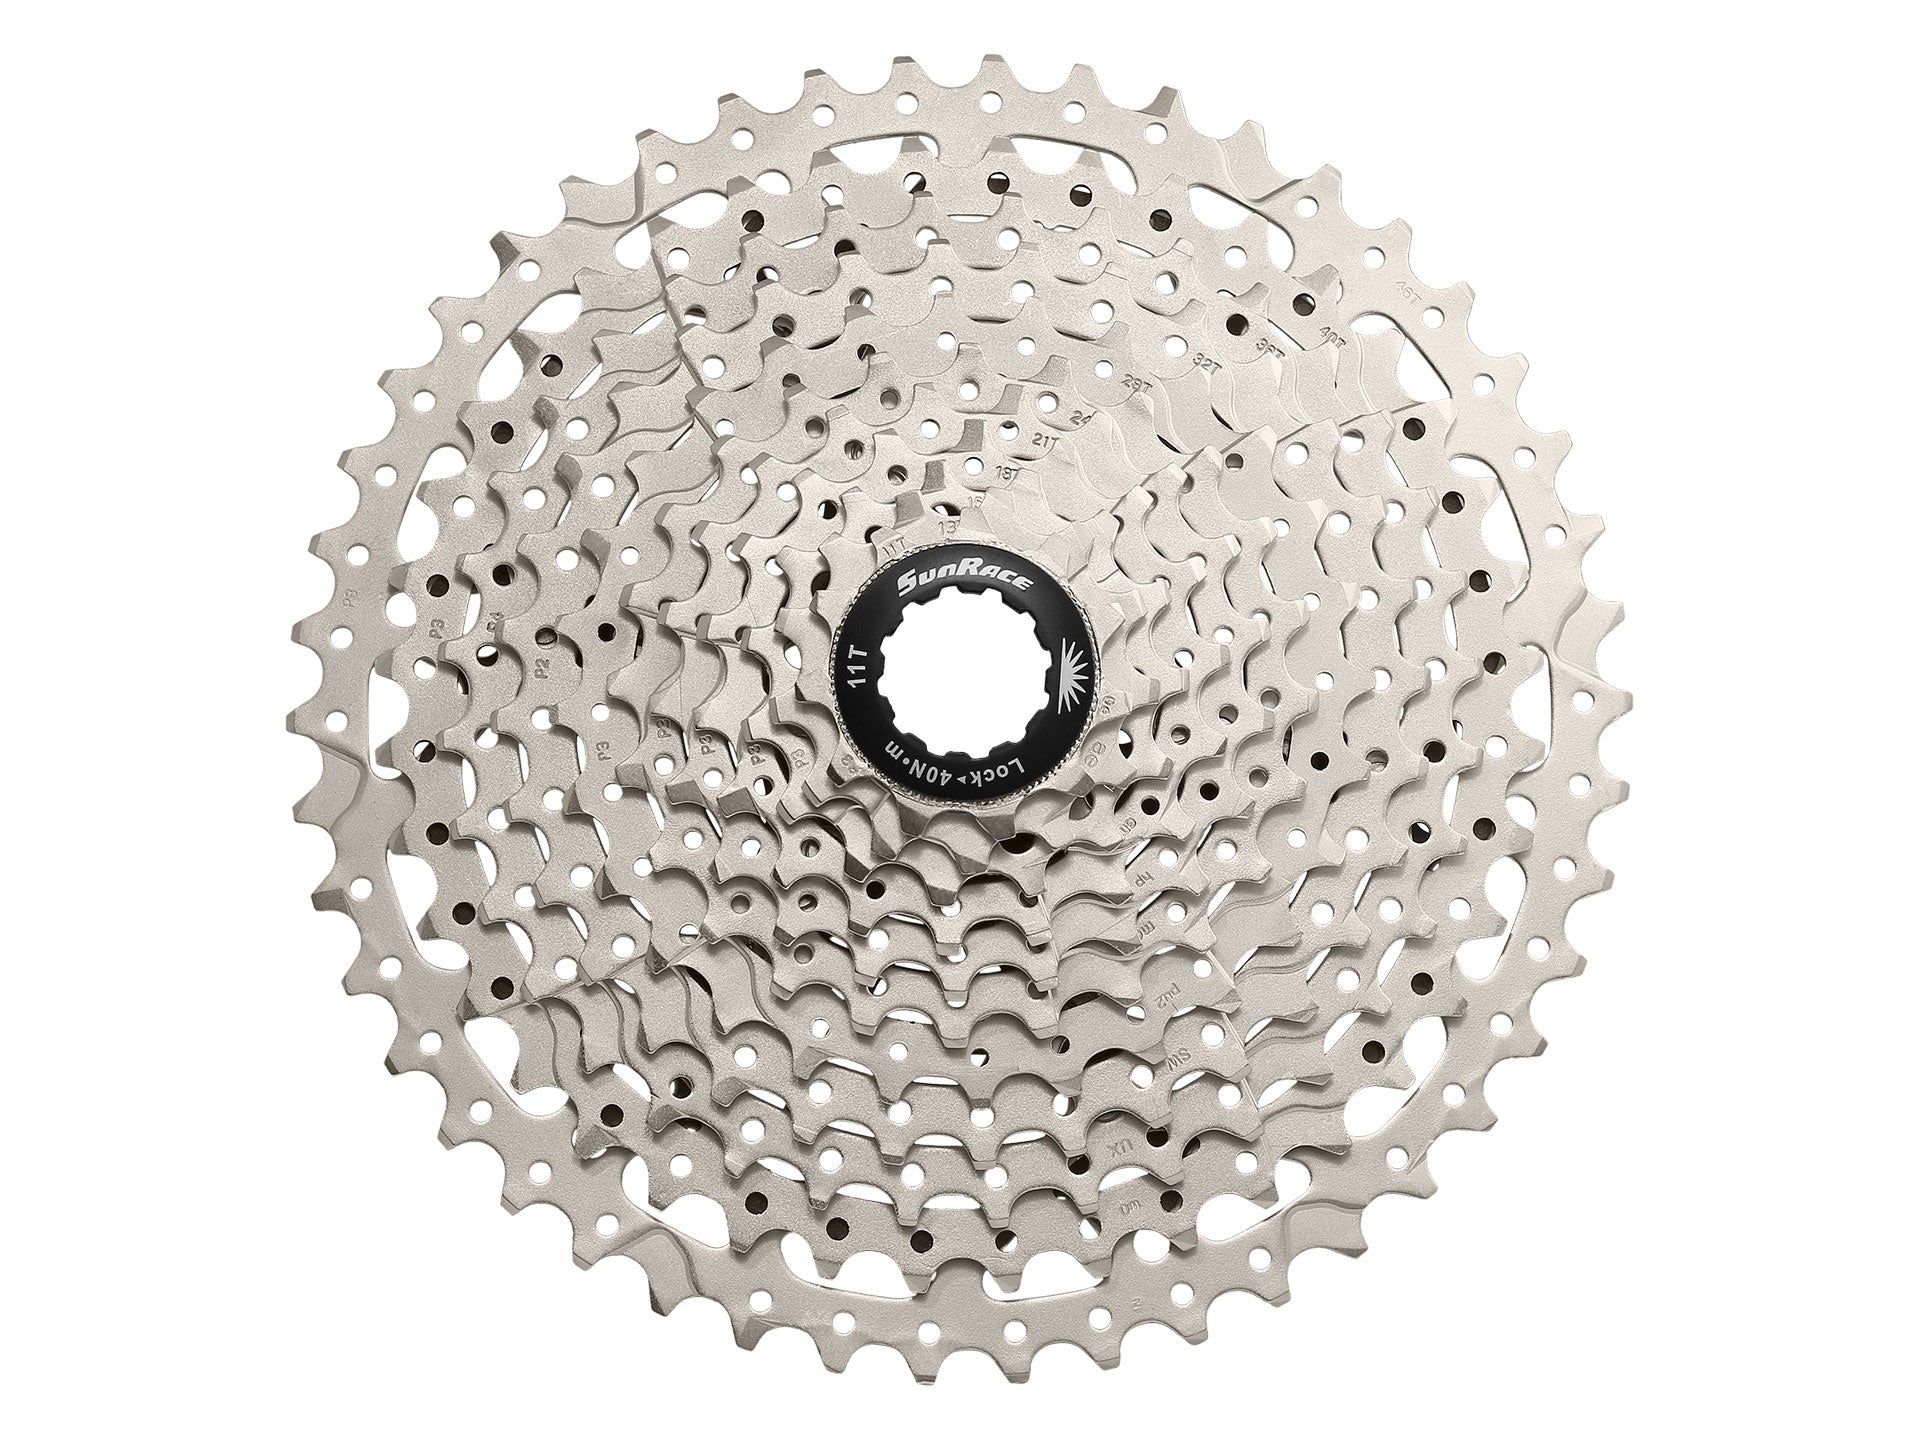 SUNRACE CSMS8 11 spd 11-51T cassette (Fits on Shimano 10/11 spd freehub)